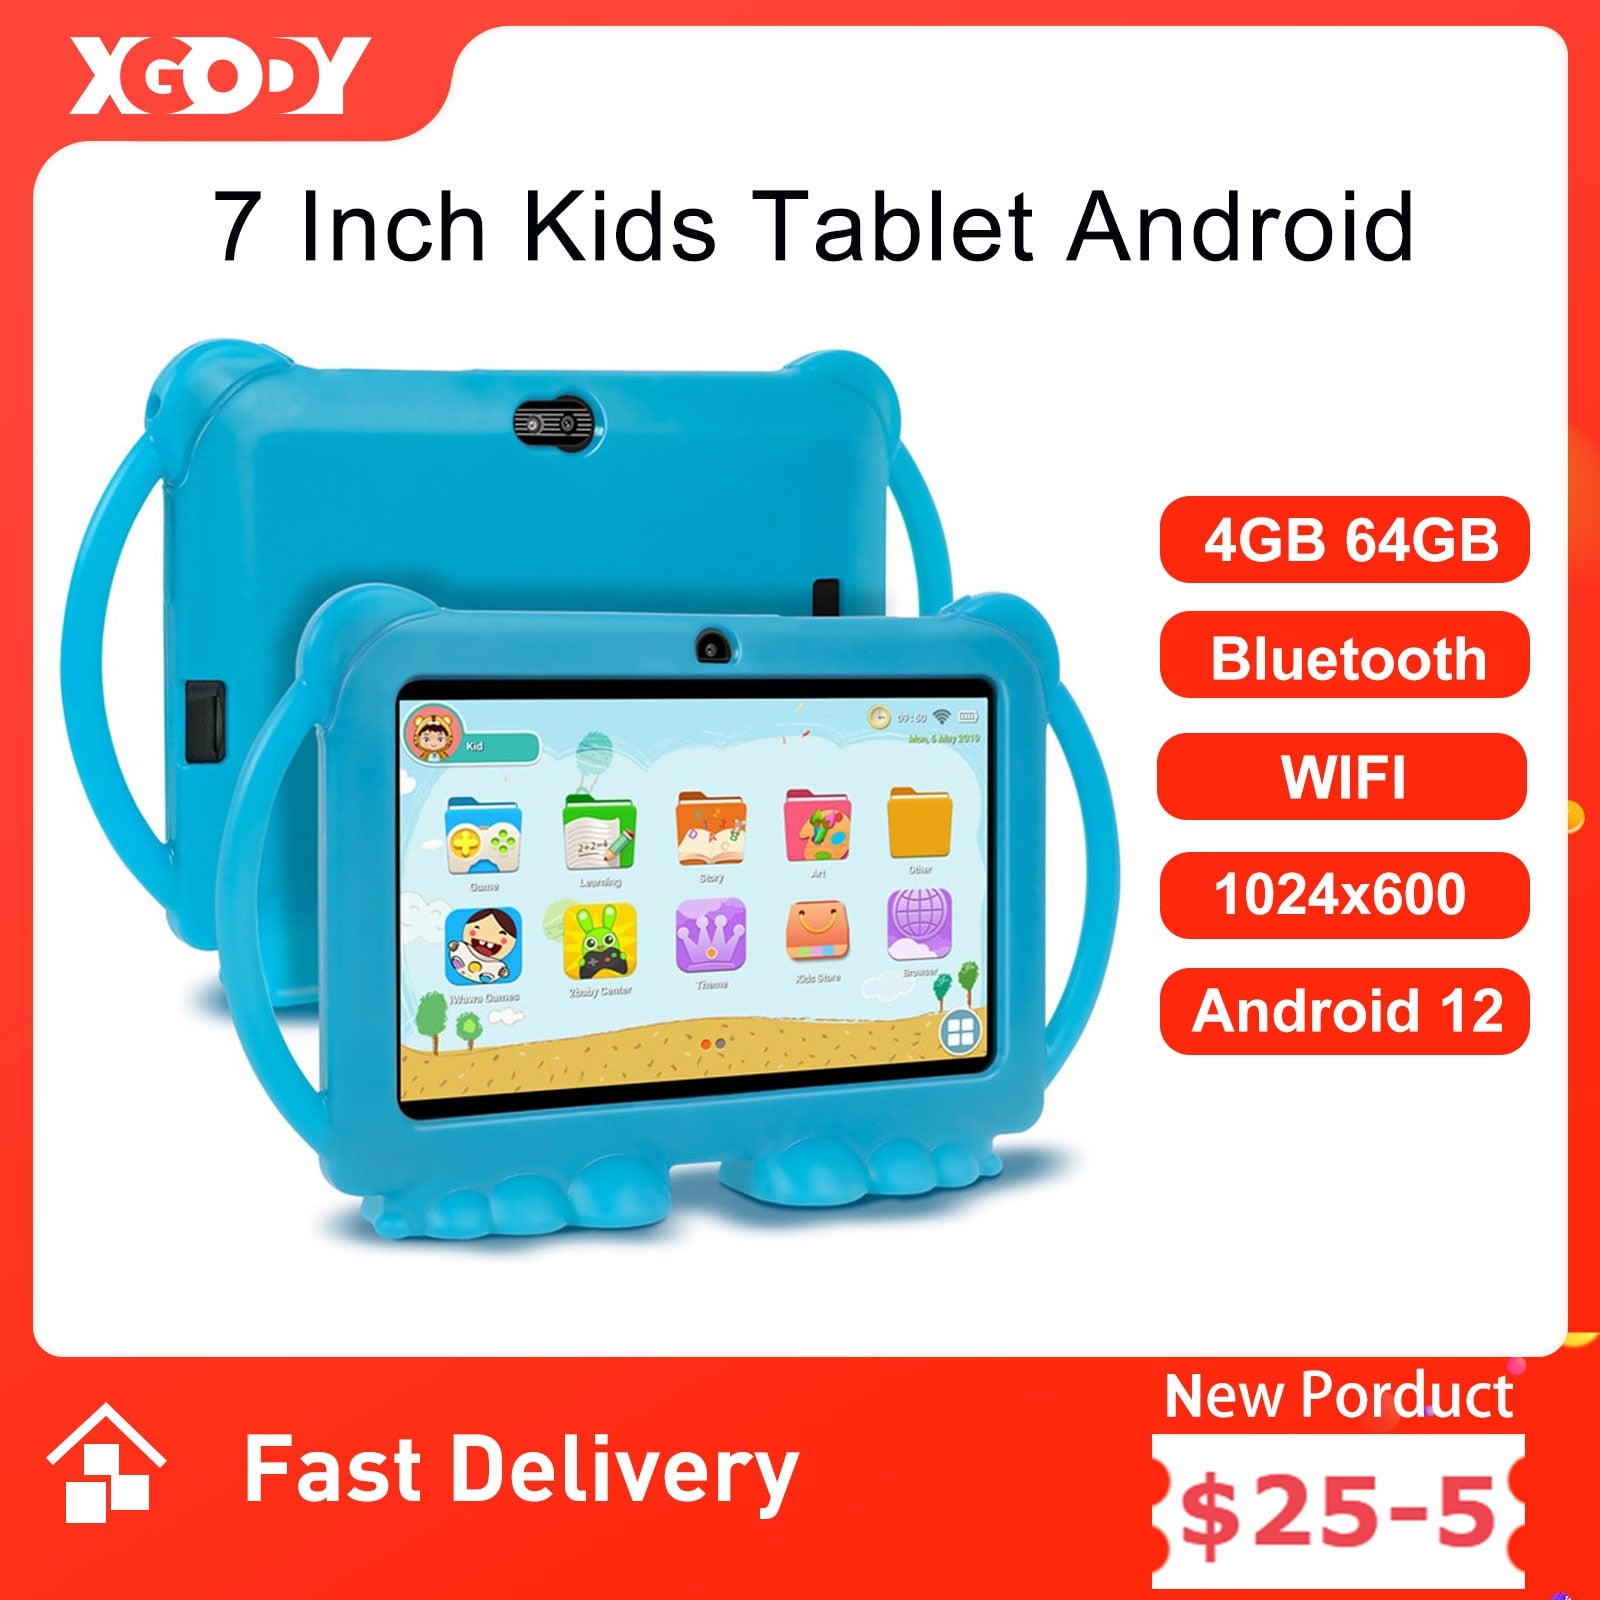 XGODY 7 Inch Android Kids Tablet PC For Study Education 64GB ROM Quad Core WiFi OTG 1024x600 Children Tablets With Tablet Case